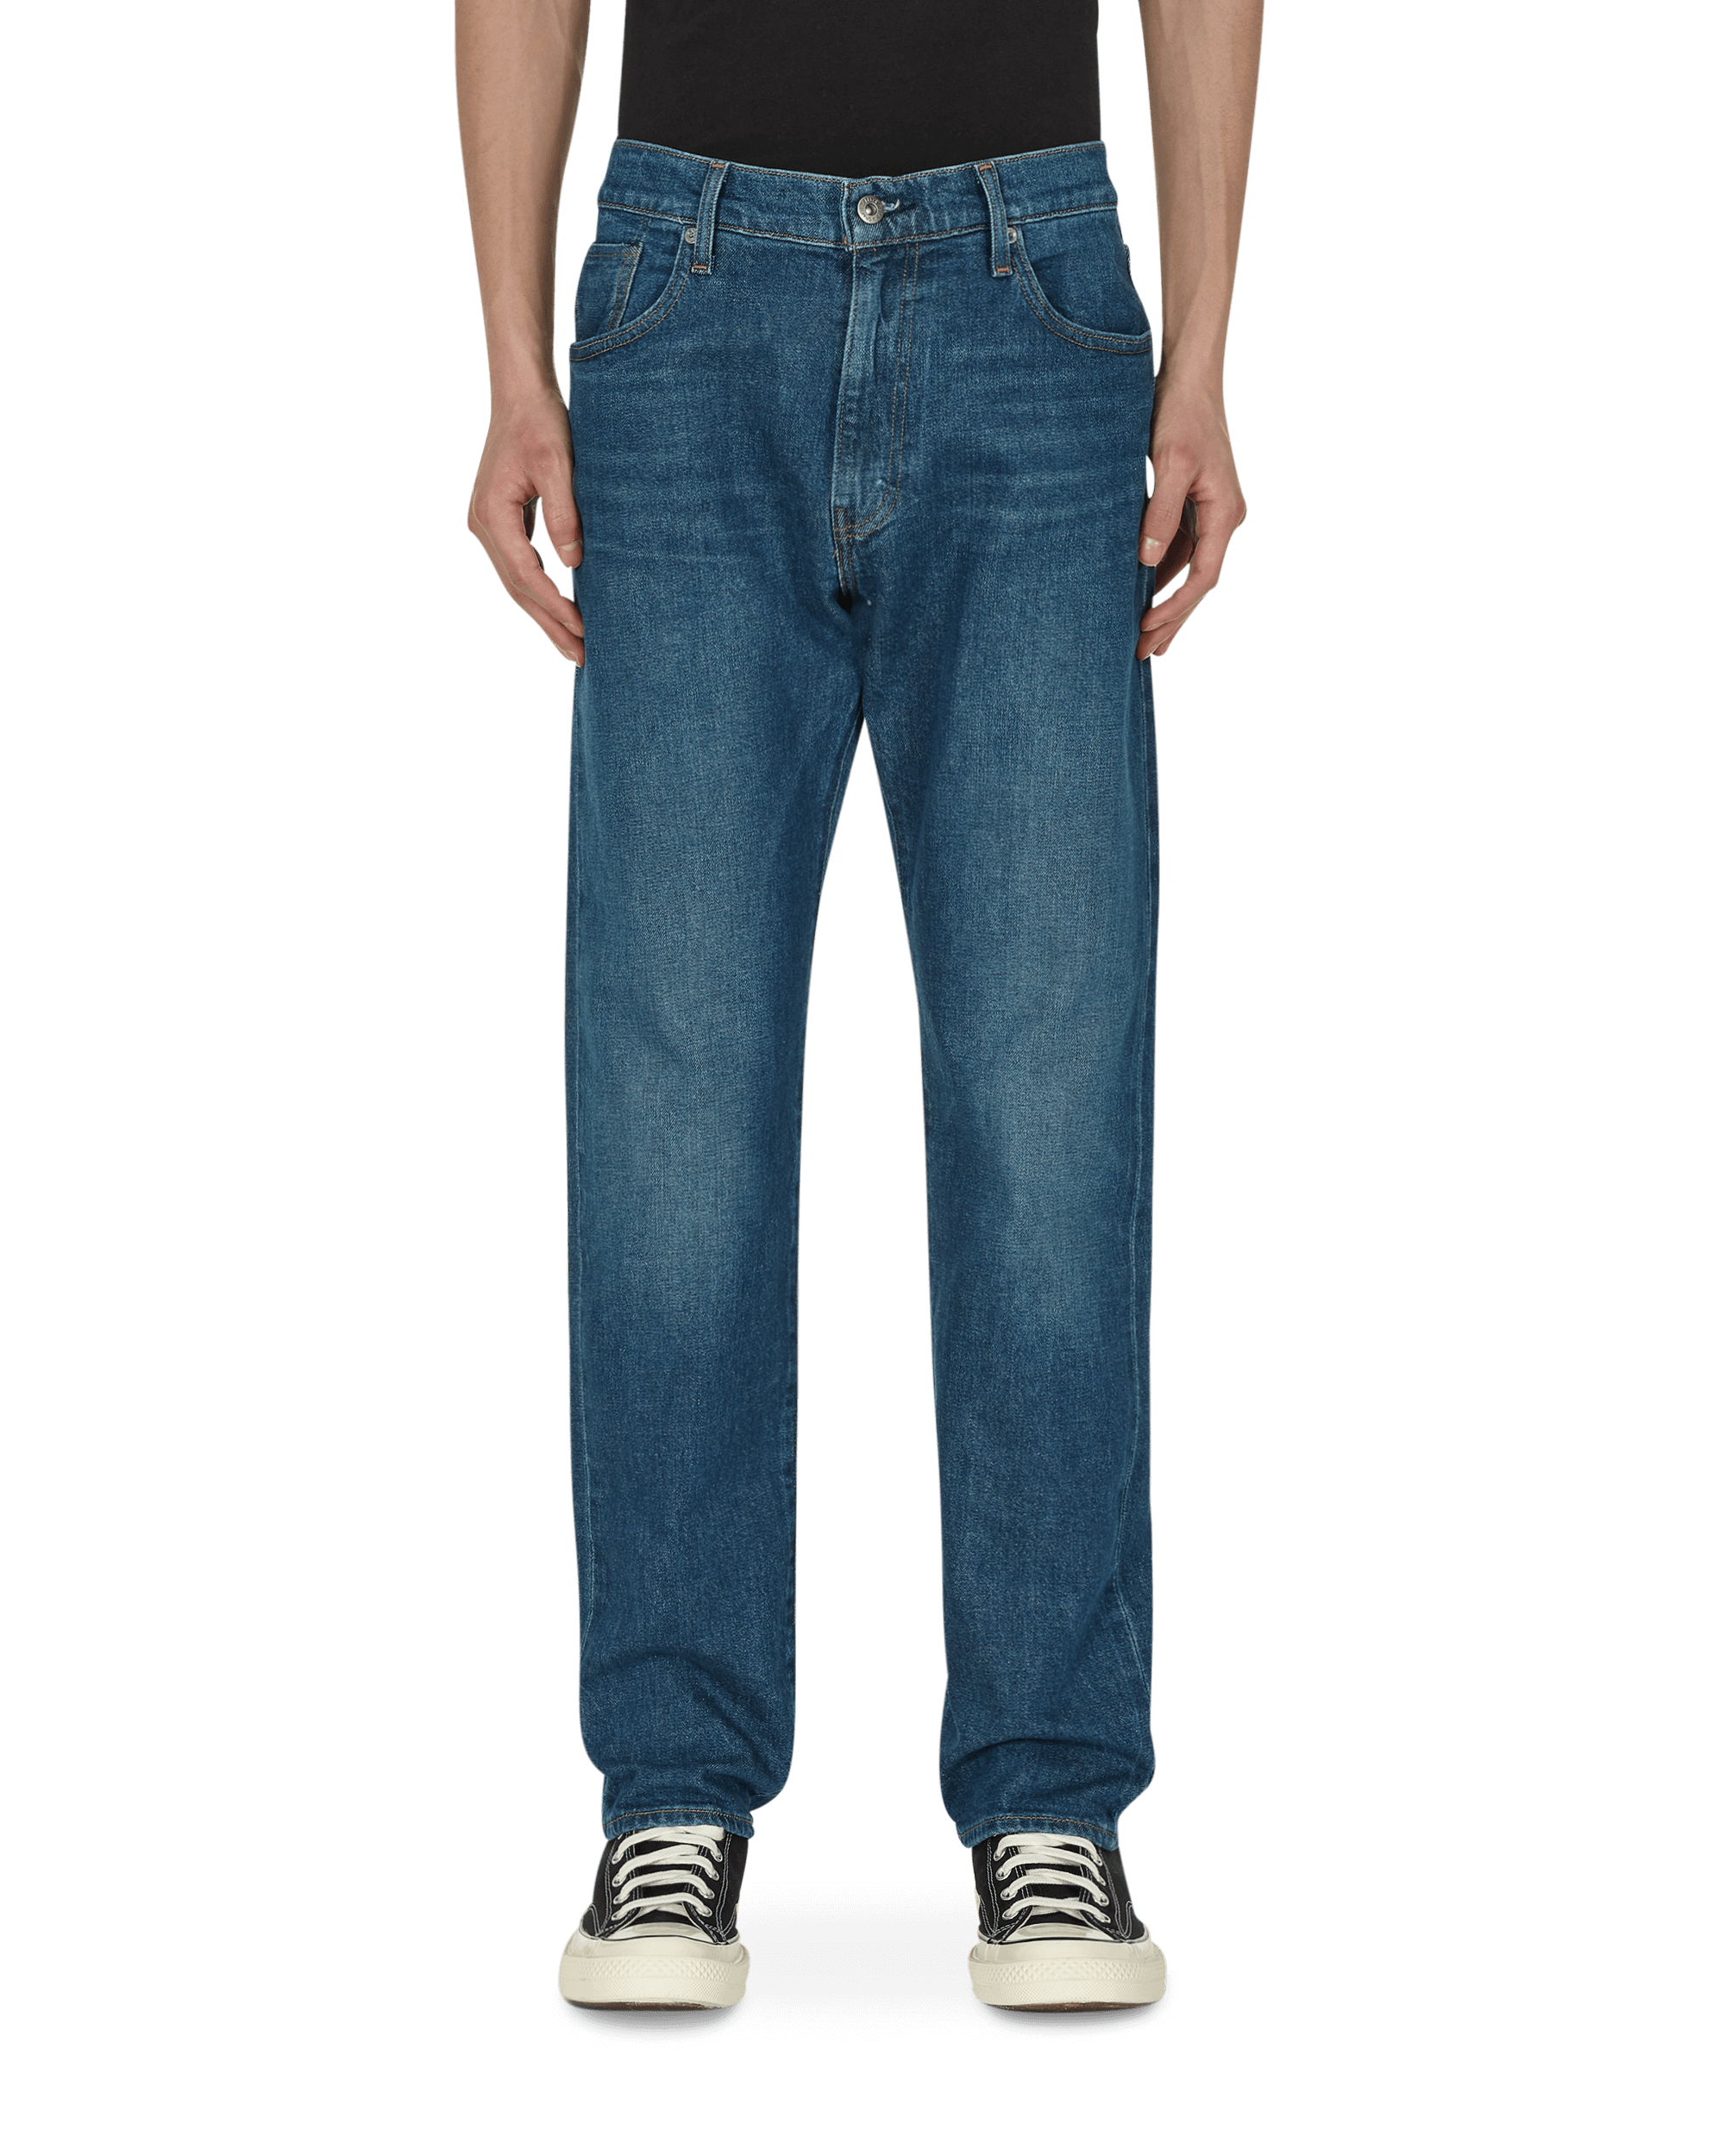 Levi's Made & Crafted Lmc 551Z Straight Fit Blue Pants Denim 17599 0011